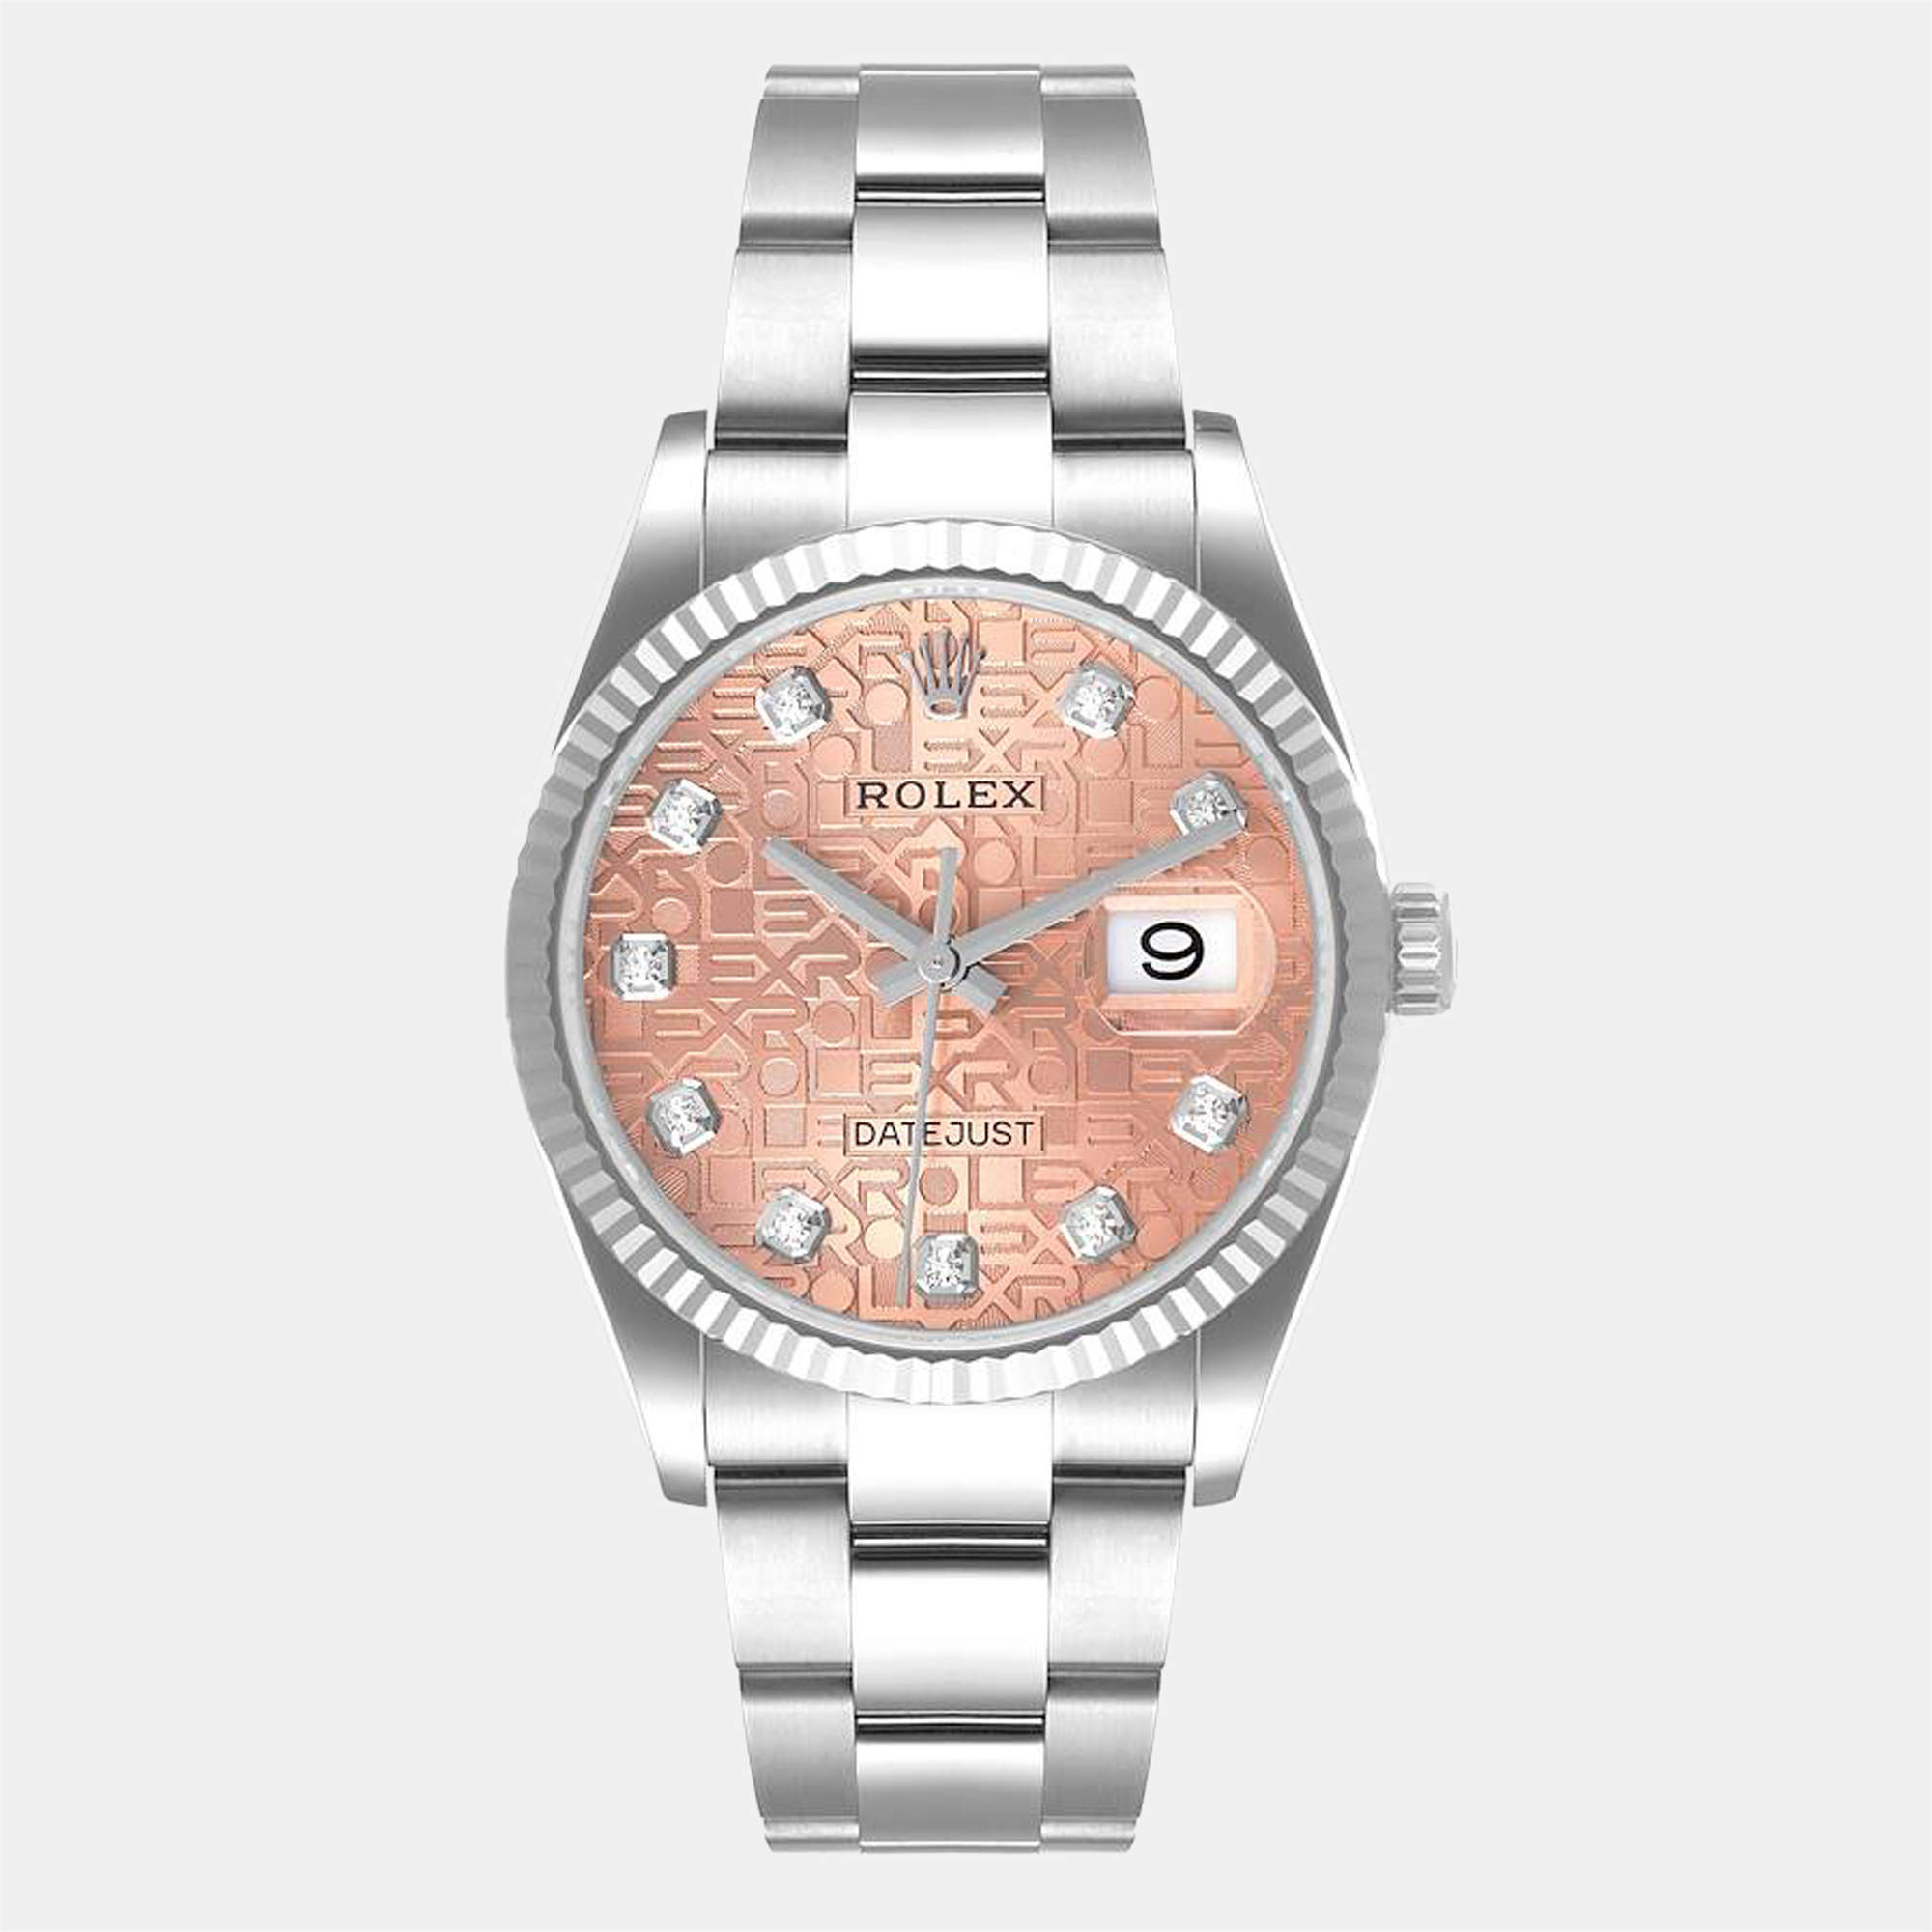 Rolex Pink Diamonds 18K White Gold And Stainless Steel Datejust 126234 Automatic Men's Wristwatch 36 mm